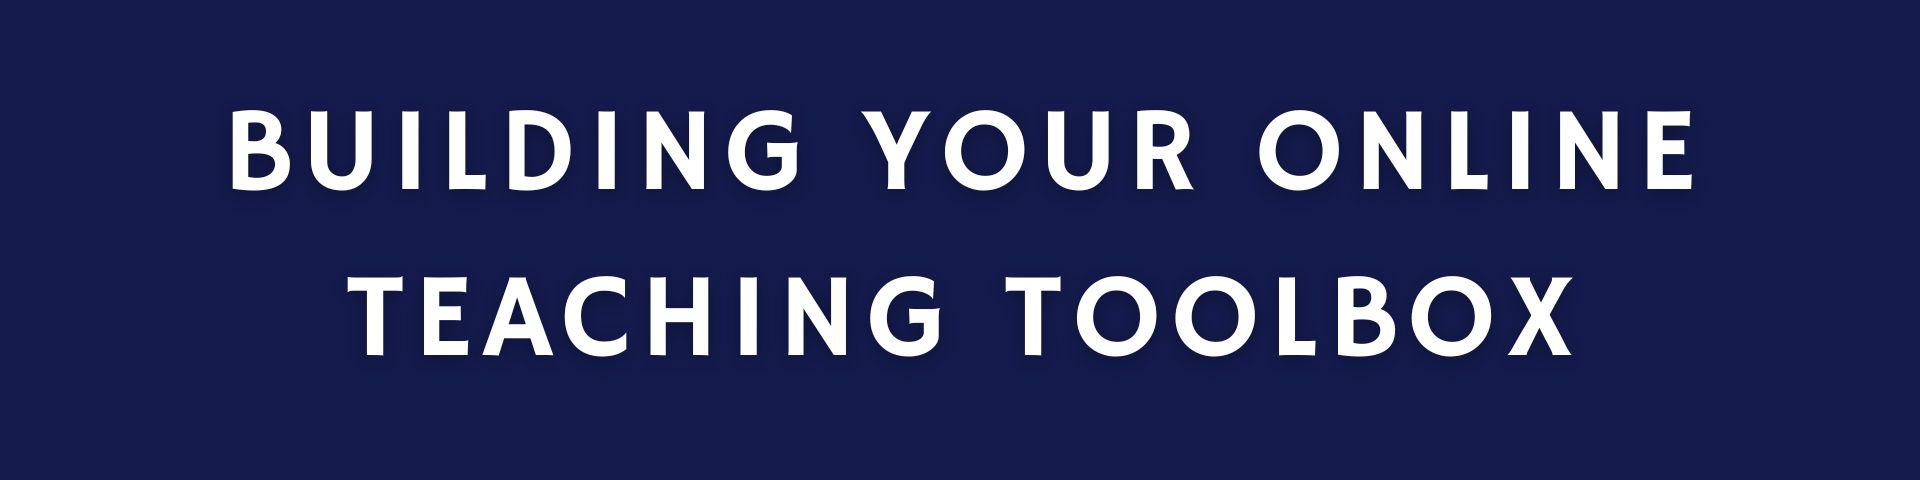 Title on blue background with white letters "Building your online teaching toolbox"